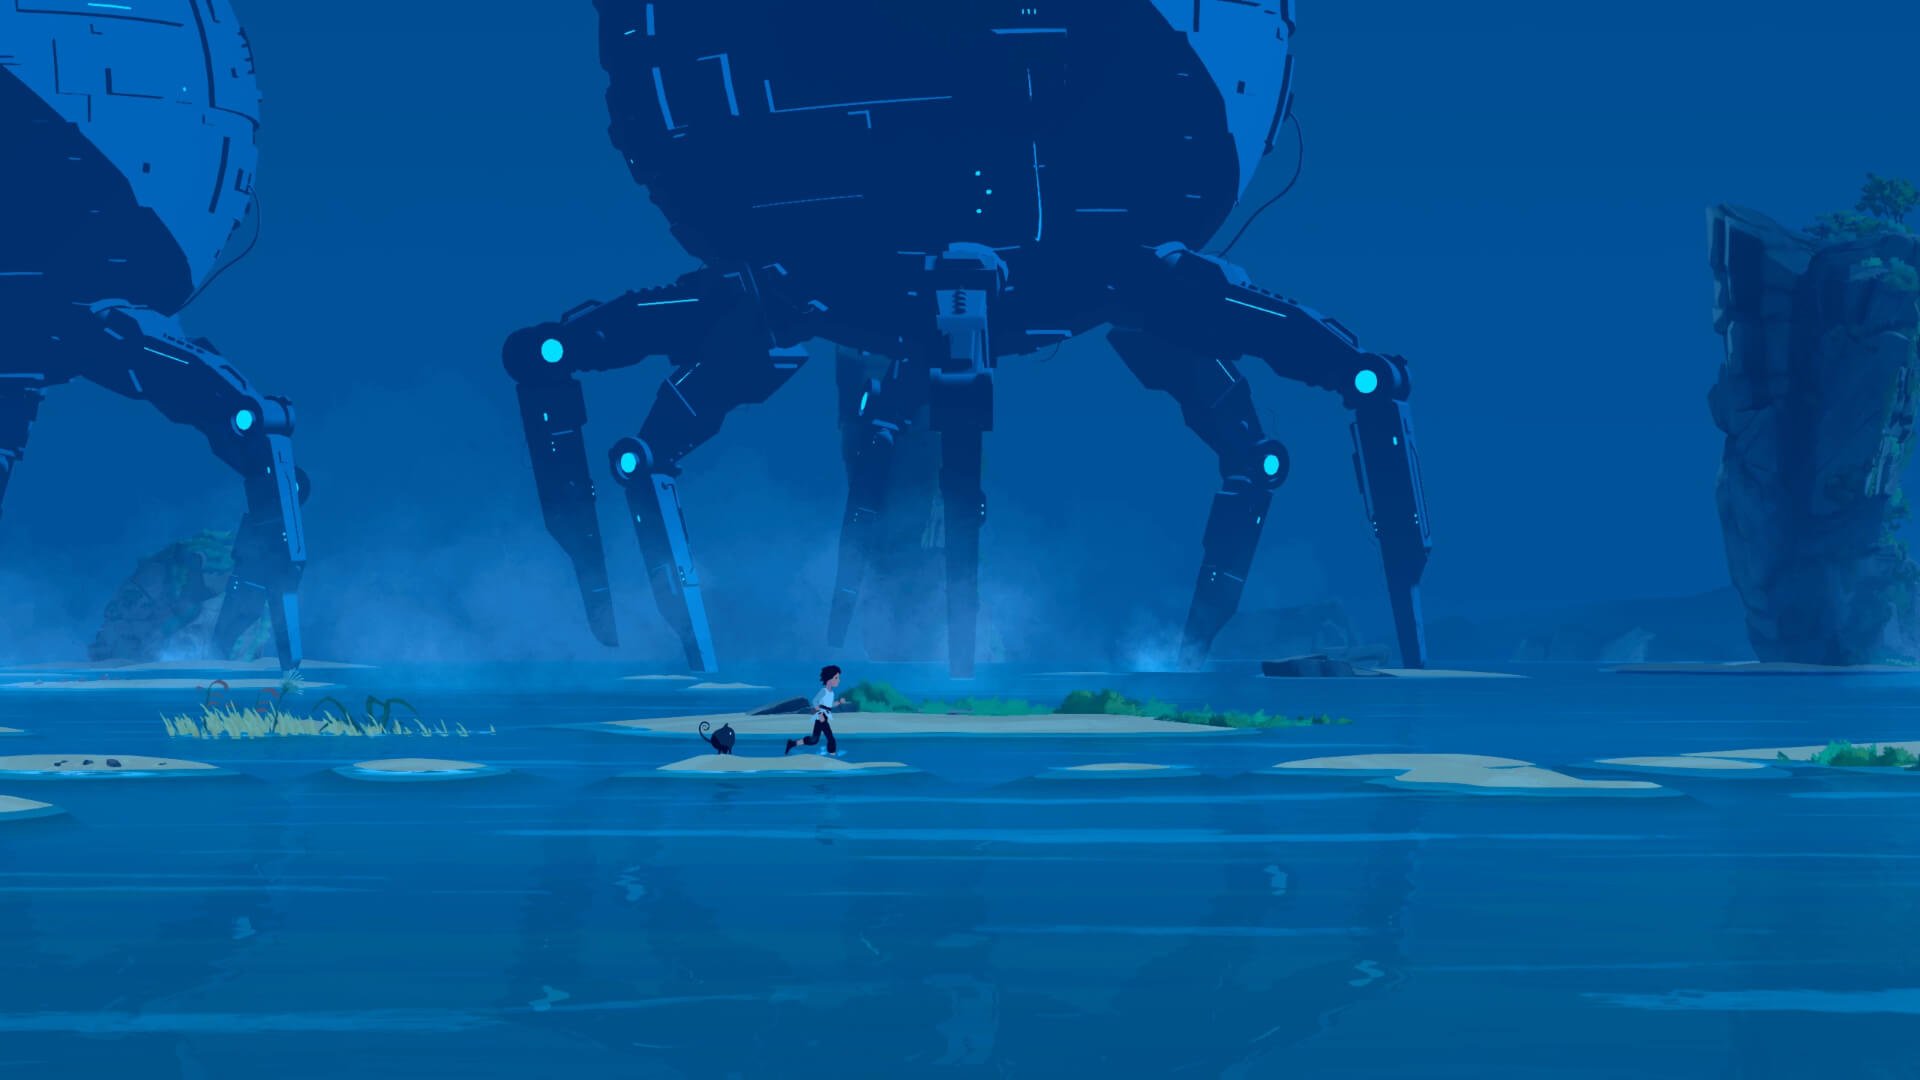 Lana running through the legs of giant robots in Planet of Lana